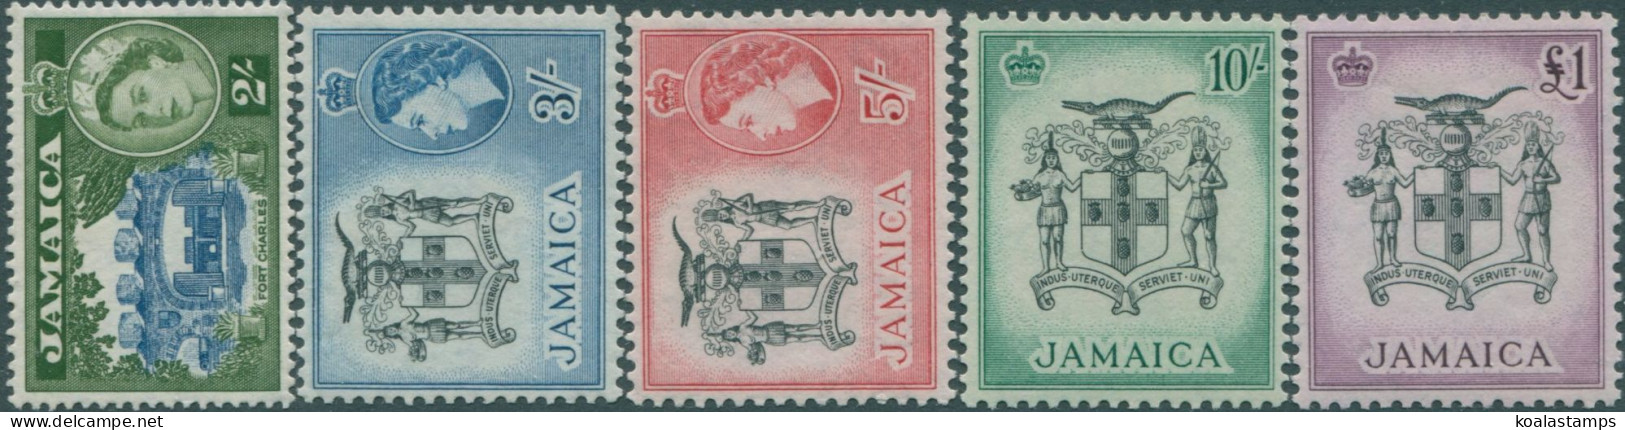 Jamaica 1956 SG170-174 QEII Fort Charles And Arms MLH - Jamaique (1962-...)